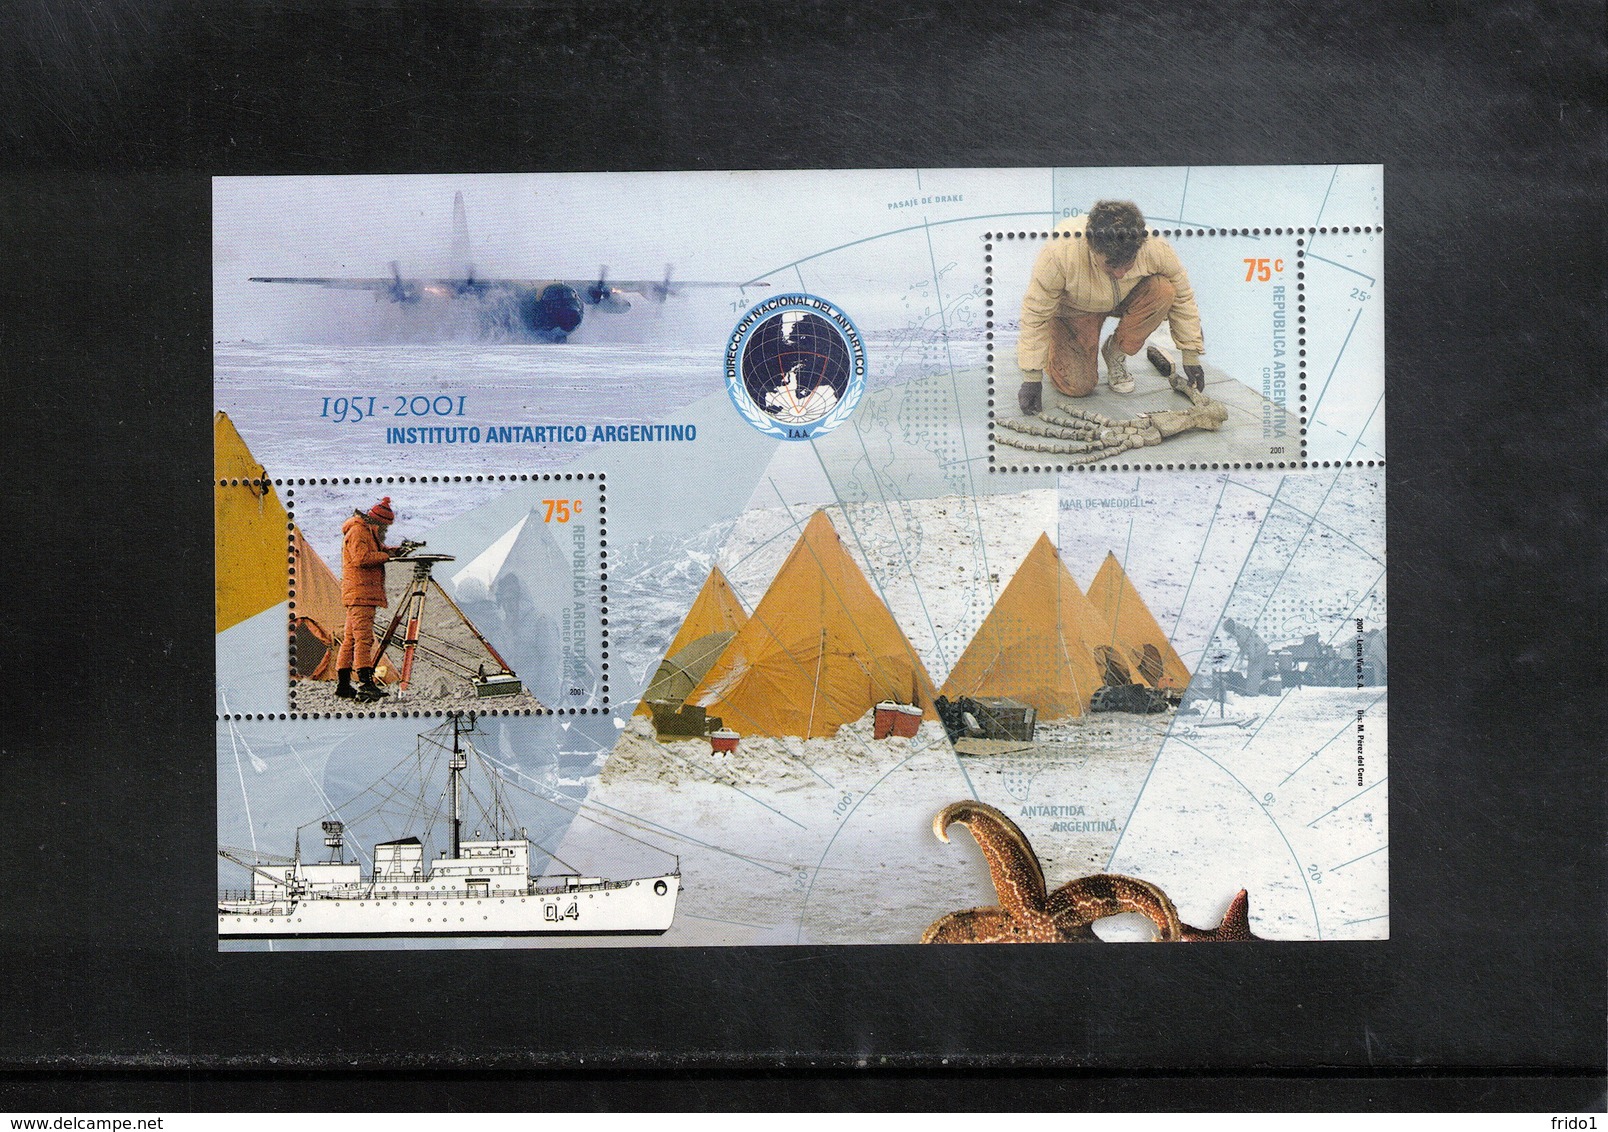 Argentina 2001 50 Years Of Argentinian Antarctic Institute Block Postfrisch / MNH - Research Programs